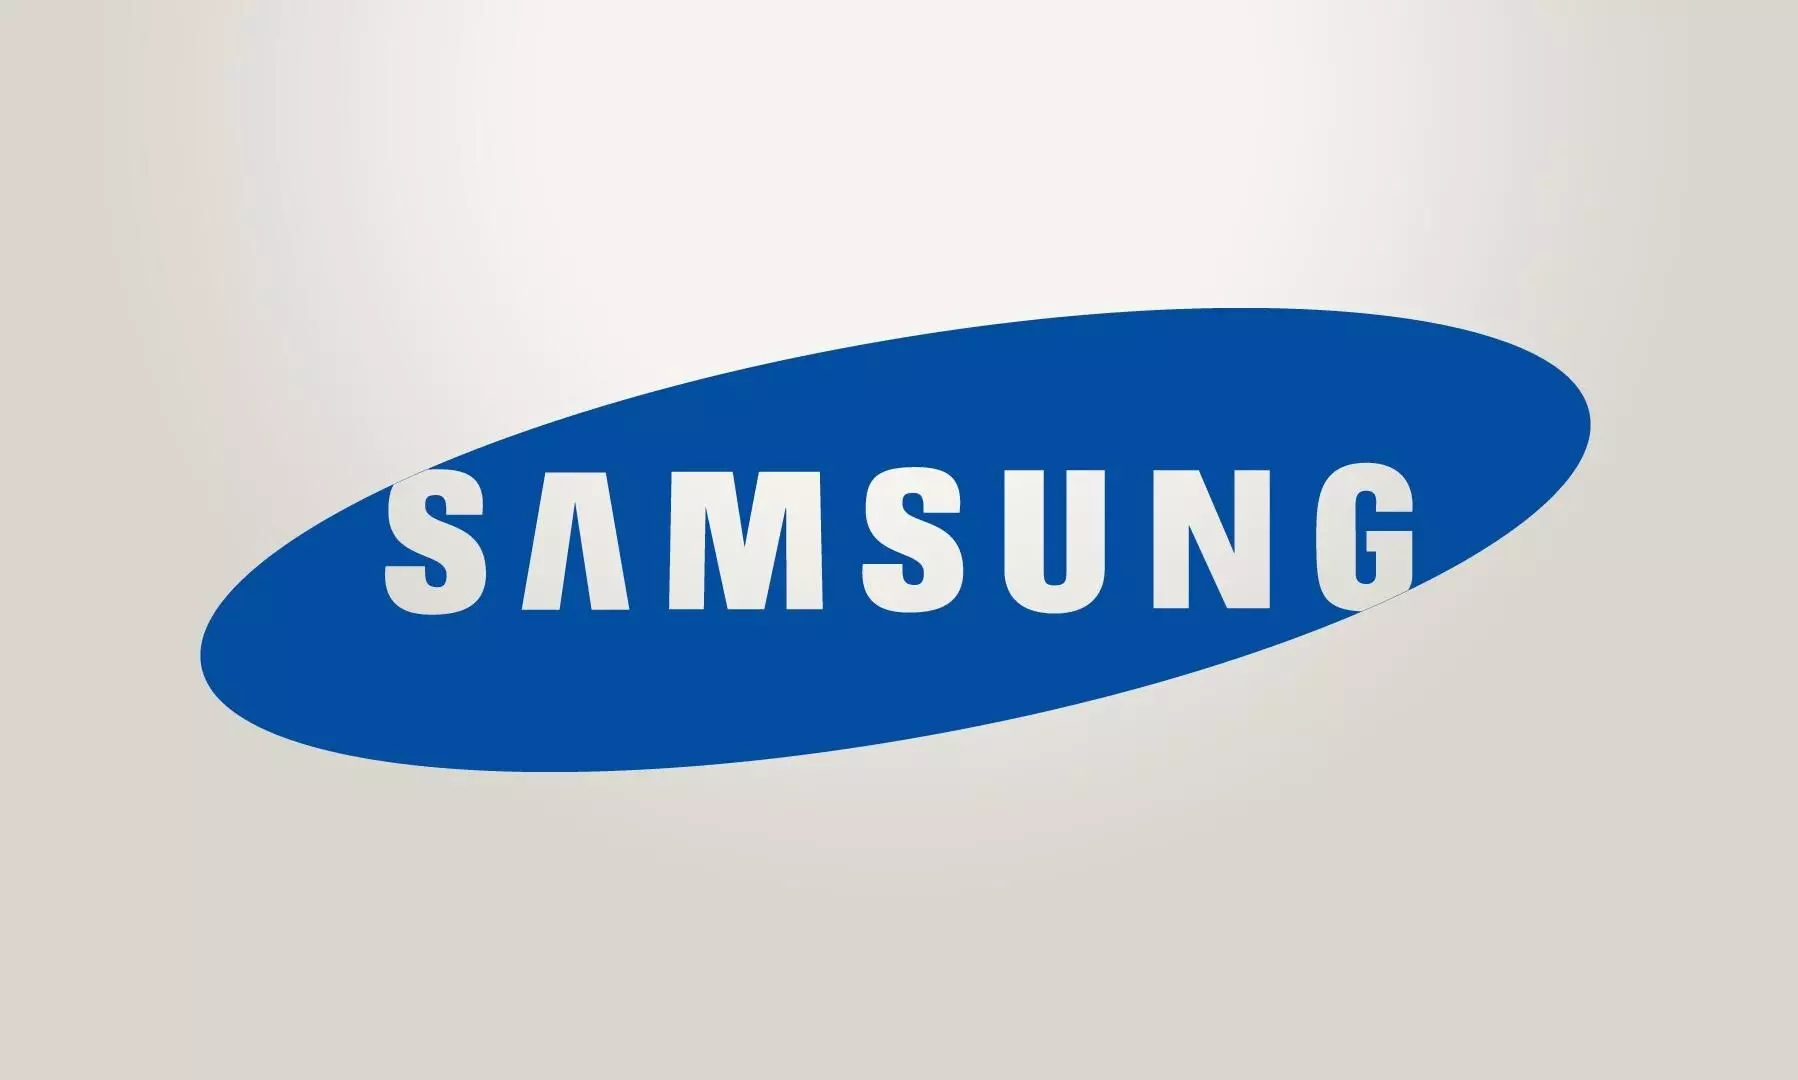 Samsung outdoes Apple in smartphone sales